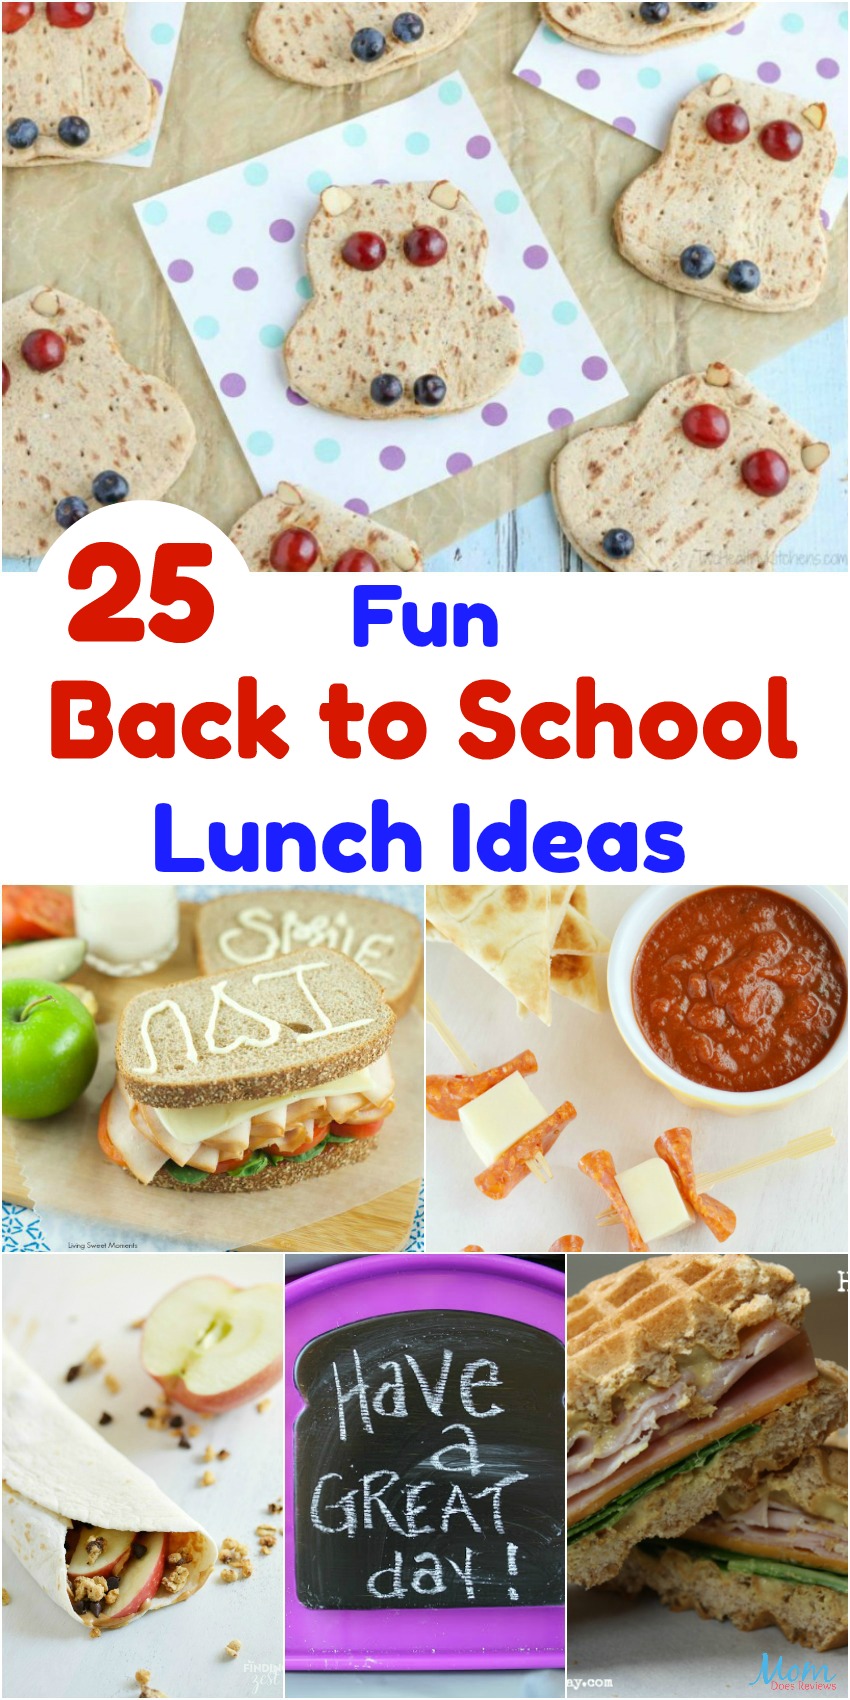 25 Fun Back to School Lunch Ideas all Kids Will Love!